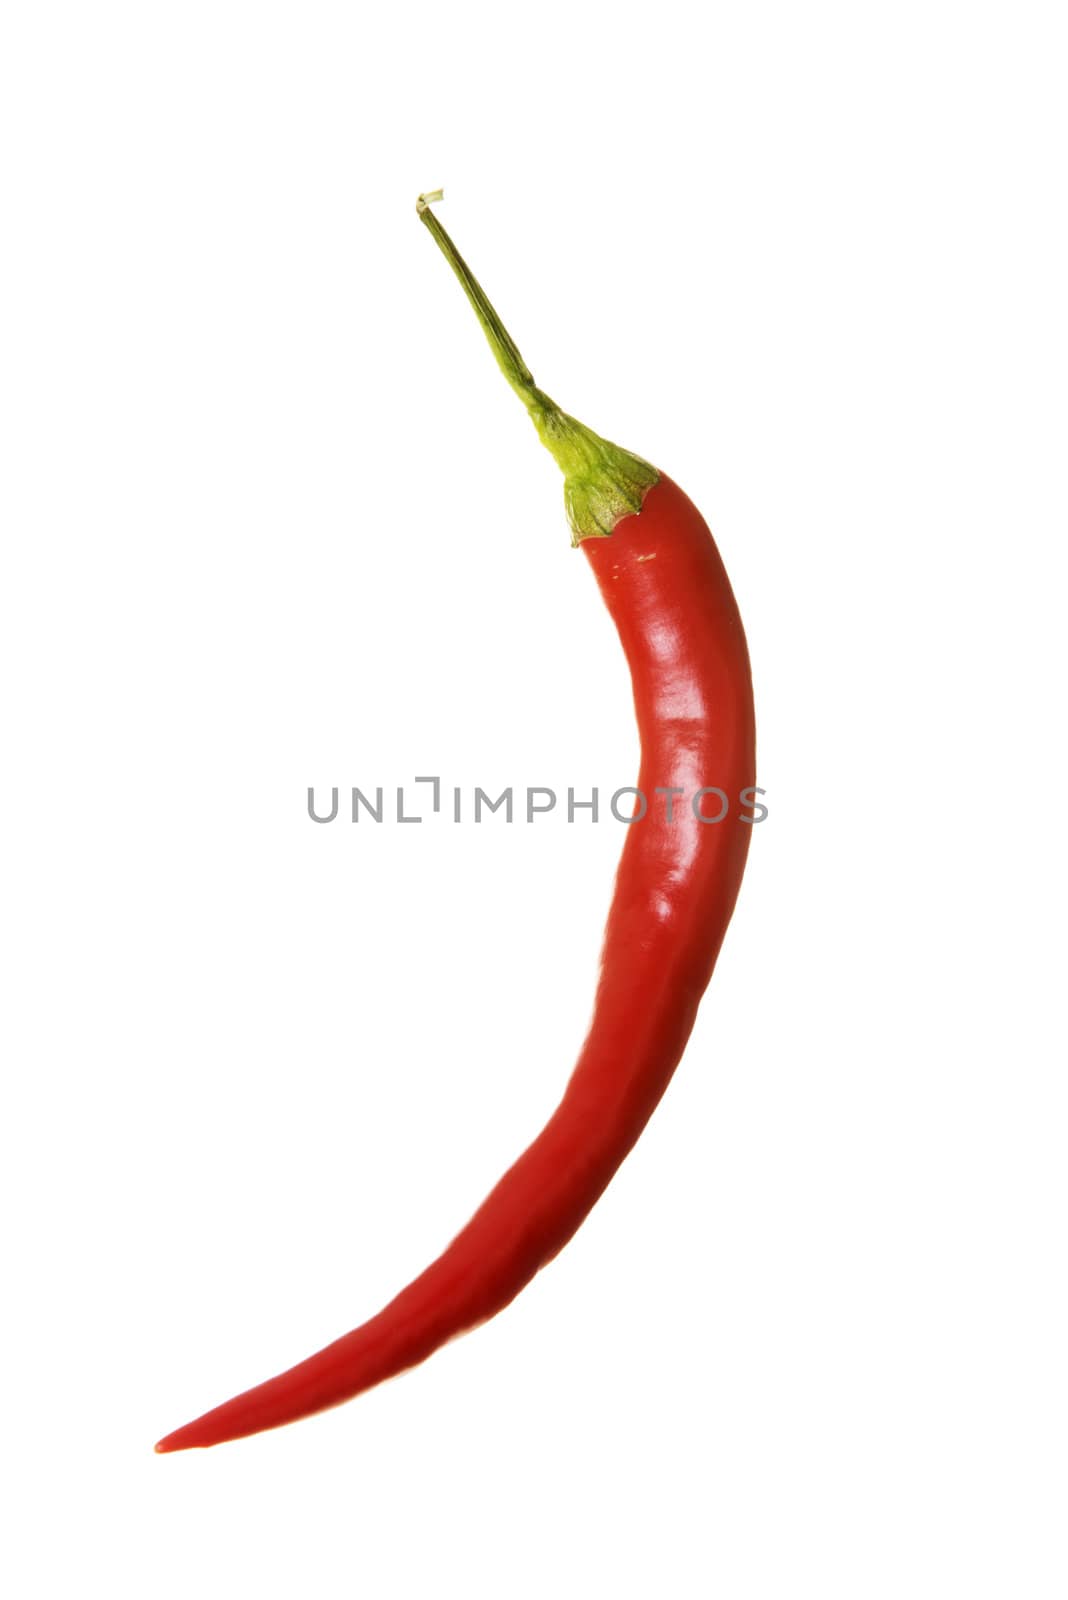 Red hot chilie pepper by BDS